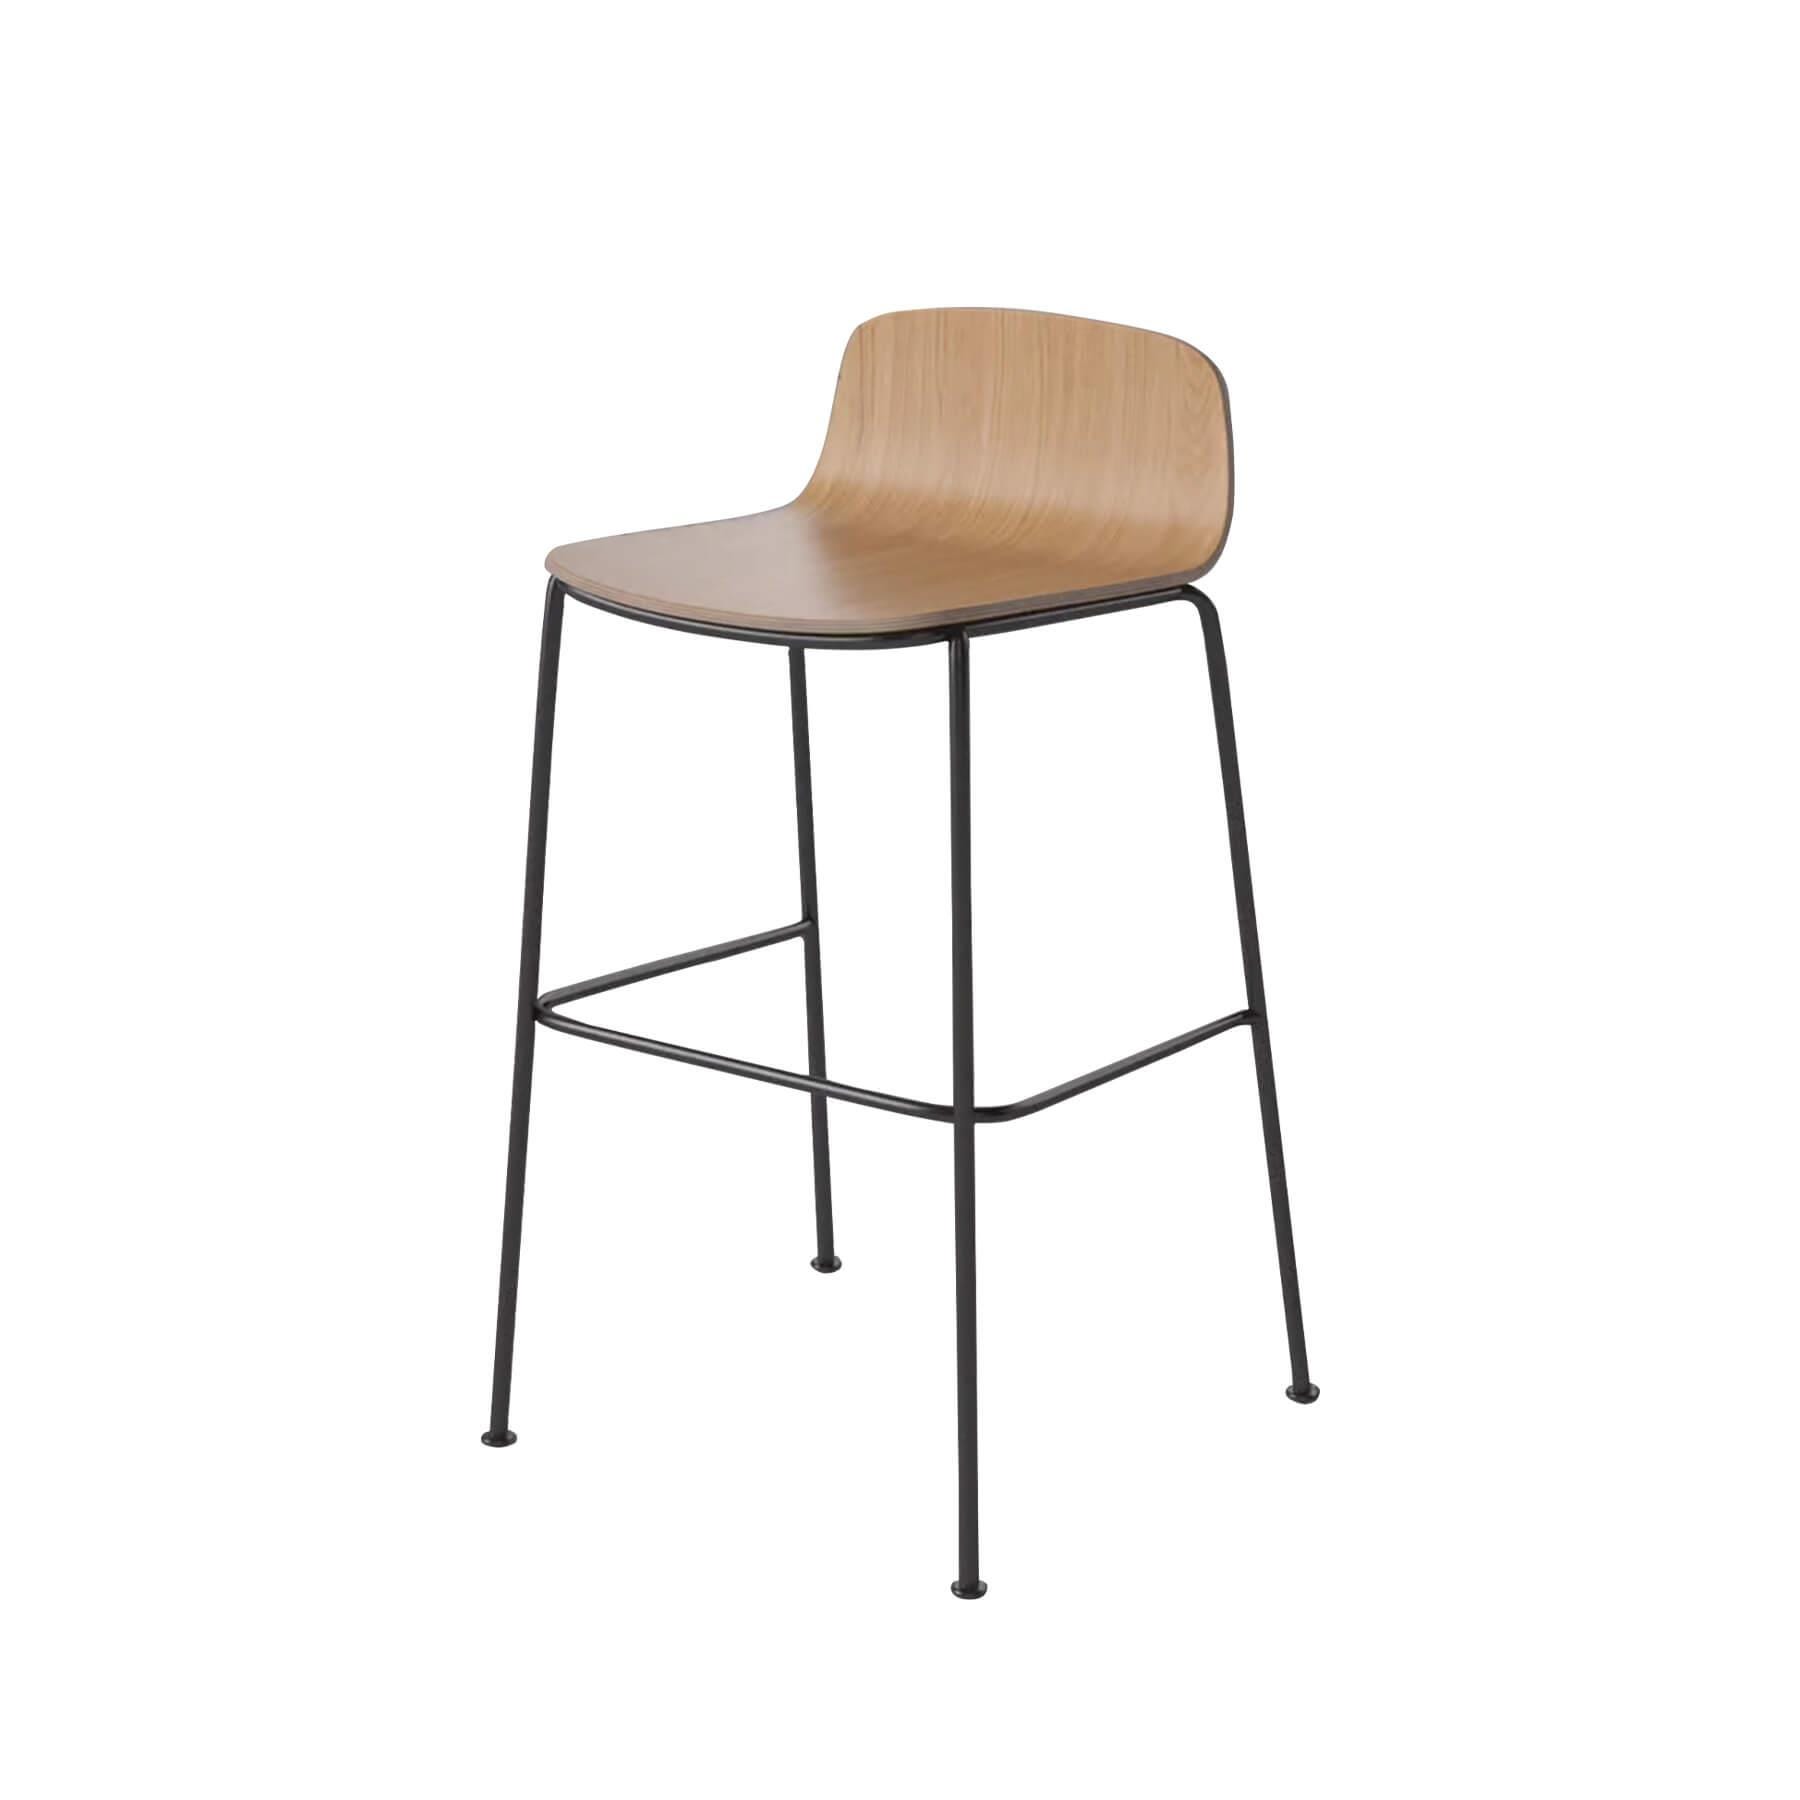 Bolia Palm Stool Kitchen Counter Stool Oiled Oak Black Laquered Legs Light Wood Designer Furniture From Holloways Of Ludlow